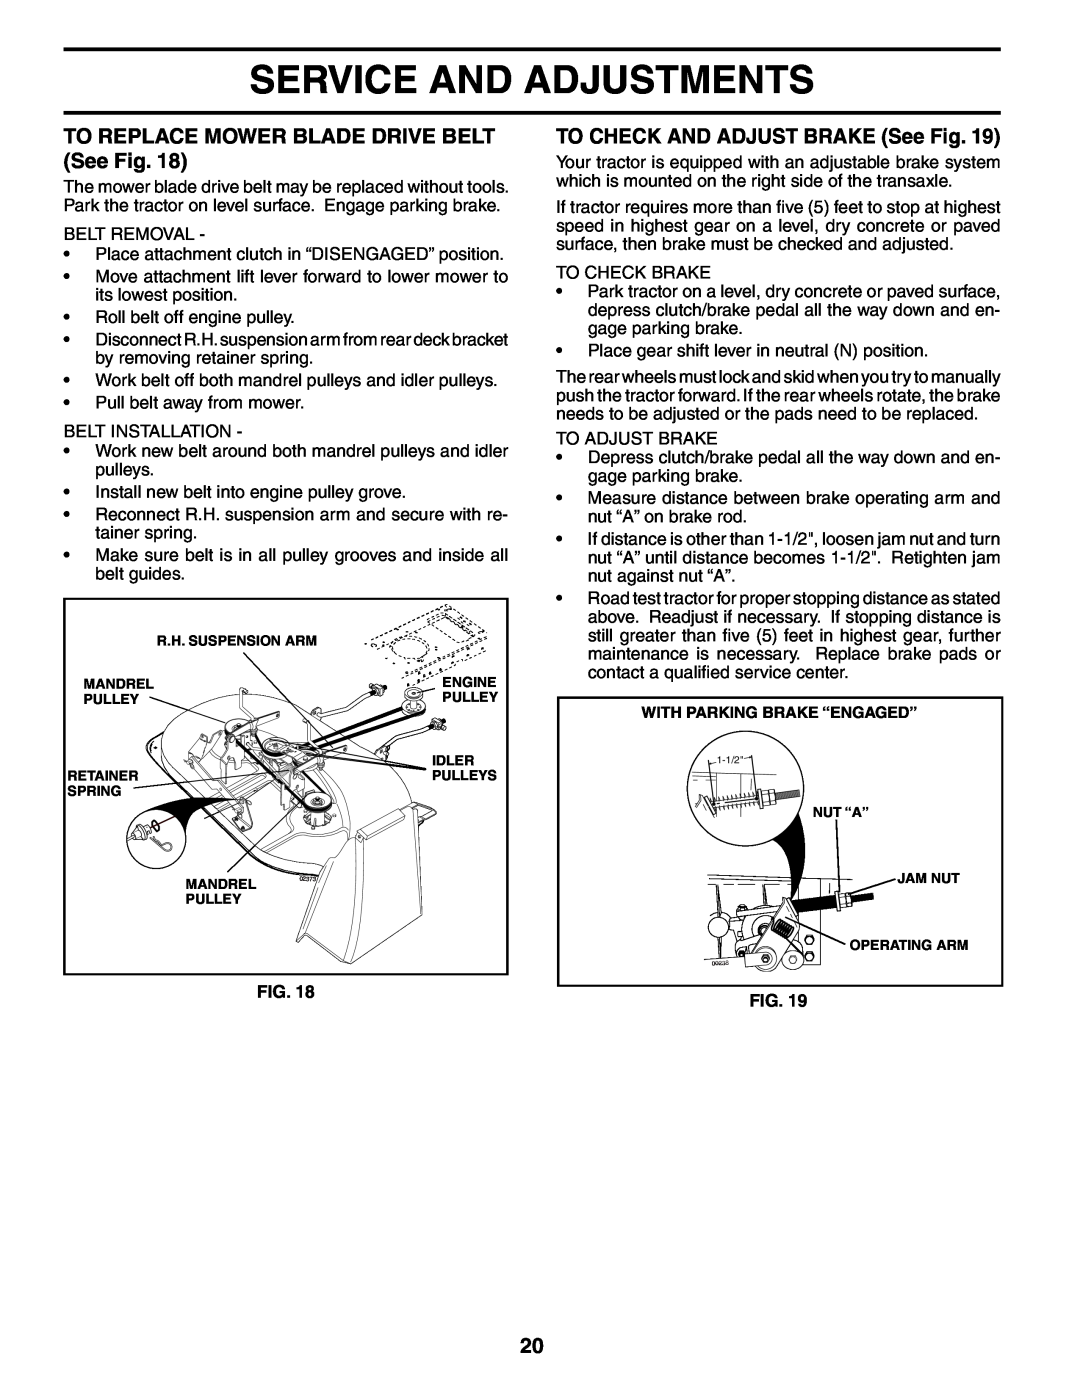 Poulan 188695 manual TO REPLACE MOWER BLADE DRIVE BELT See Fig, TO CHECK AND ADJUST BRAKE See Fig, Service And Adjustments 